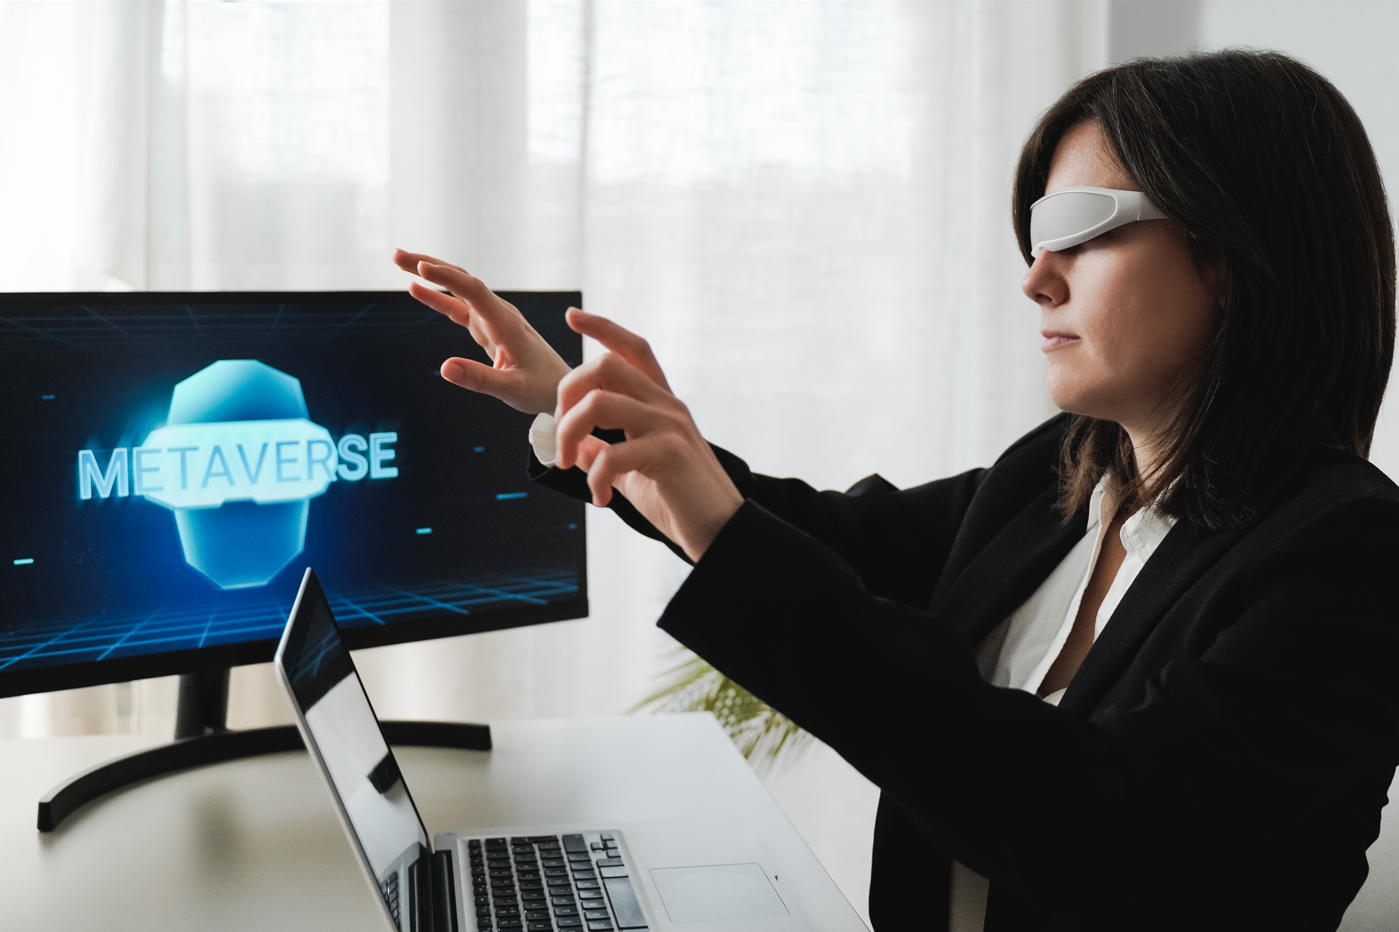 Why is Metaverse important? What is the role of market research in the Metaverse?